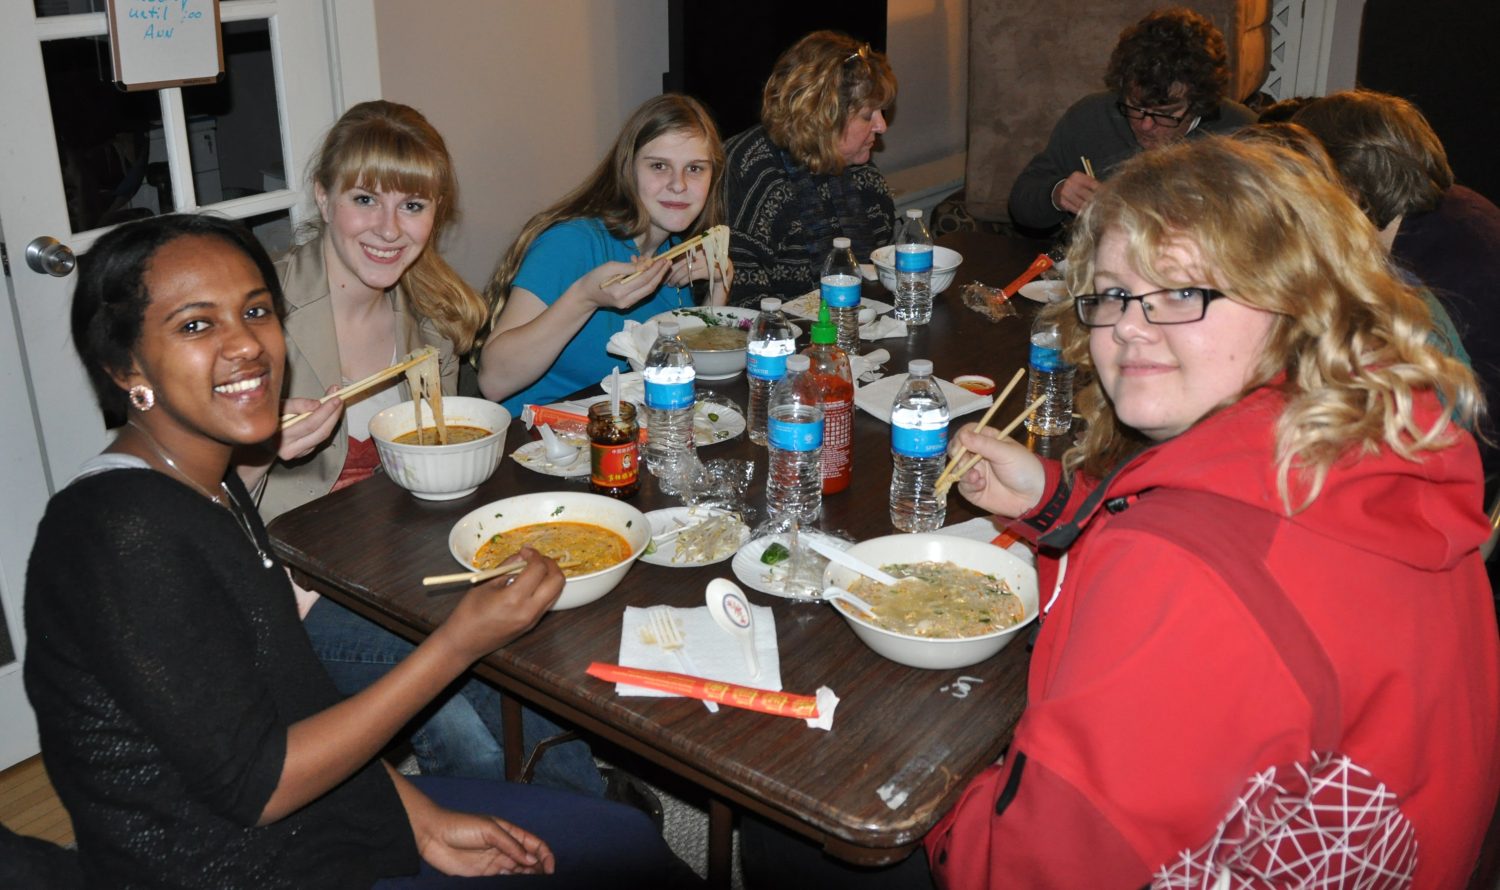 Students dined on the traditional noodle soup during the event held at the Alumni house.
Elisenda XifraReverter/Winonan